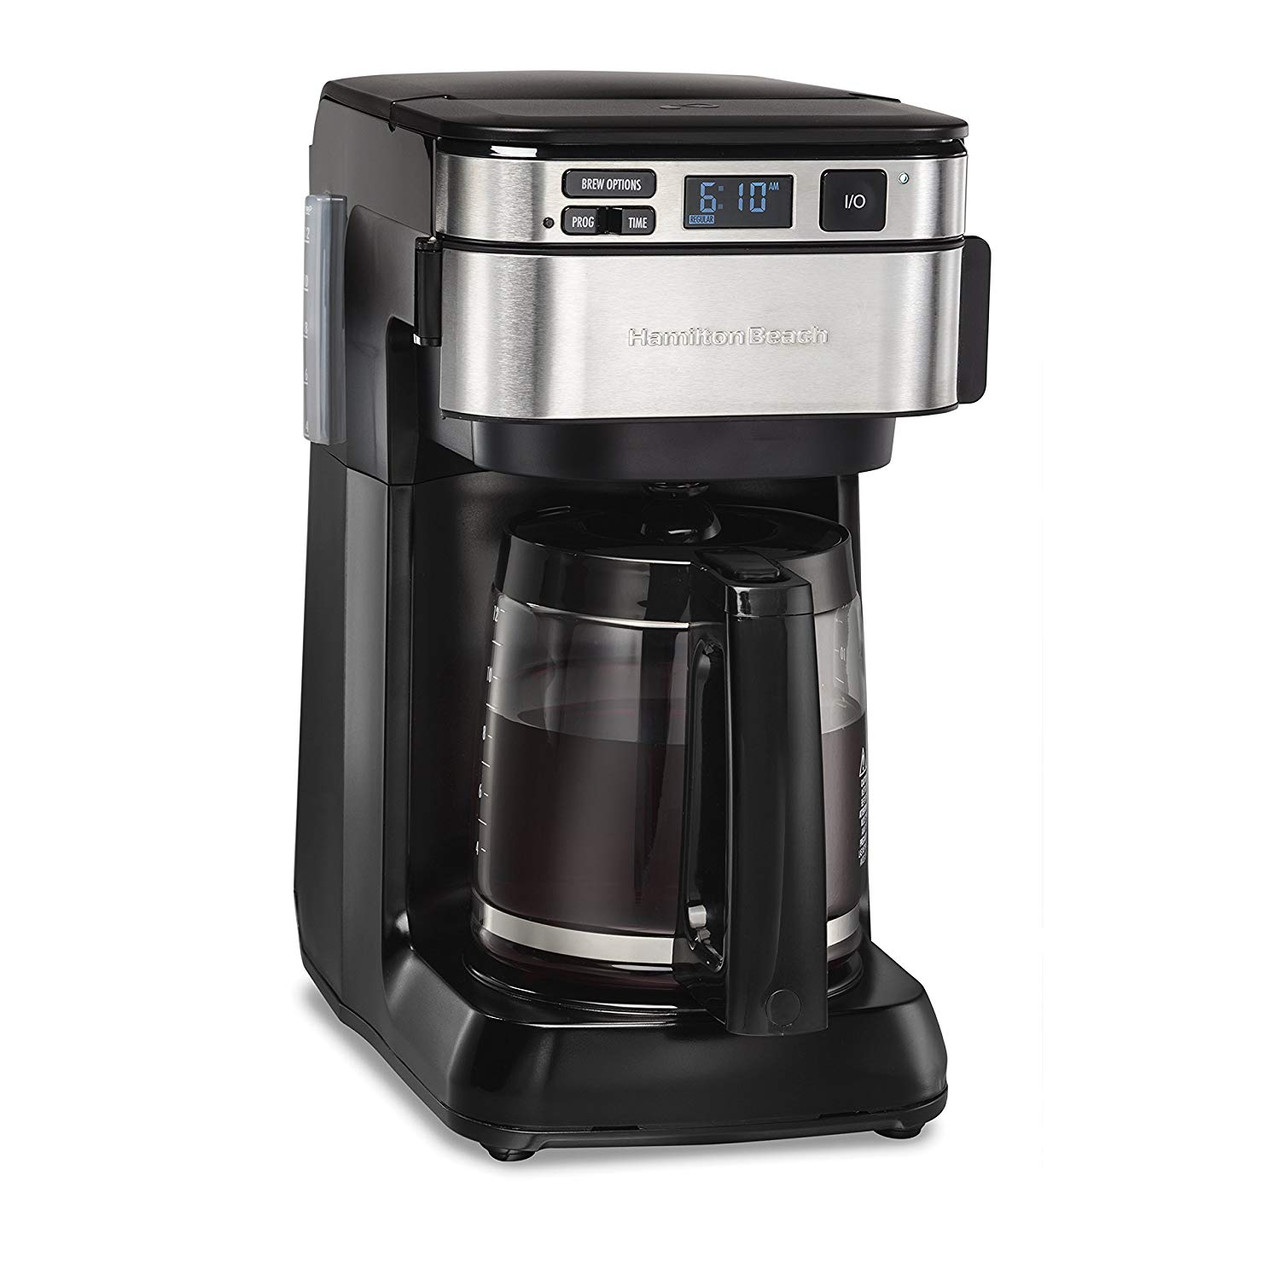 Hamilton Beach 12 Cup Programmable Coffee Maker with 3 Settings